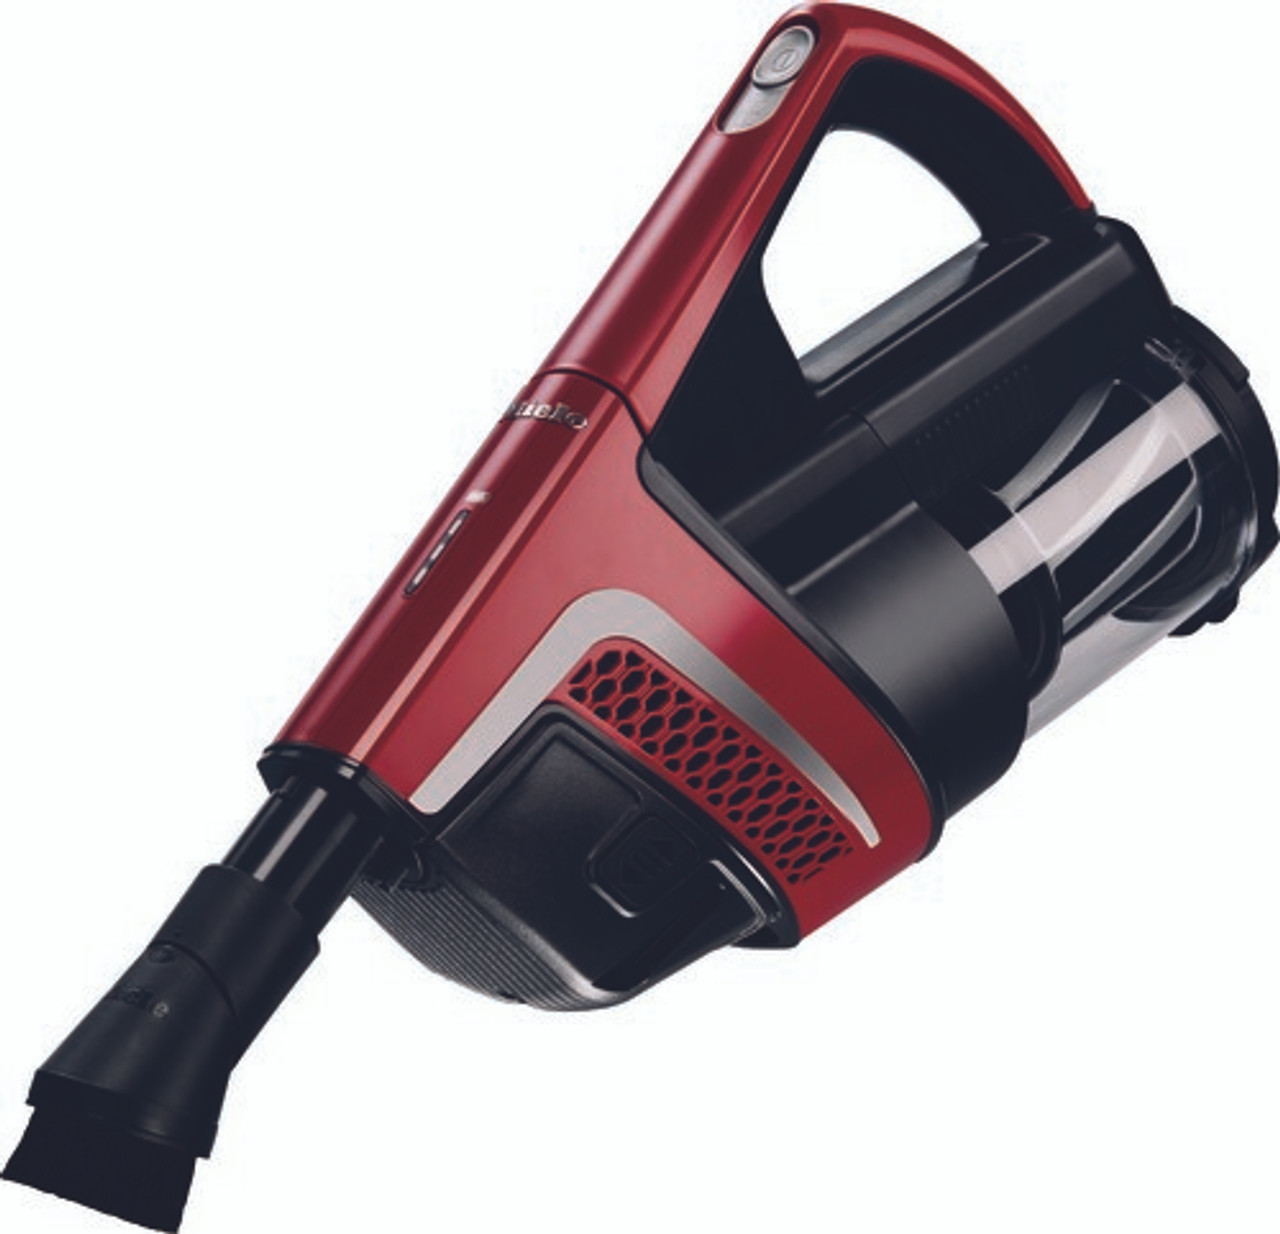 Miele Triflex HX1 Ruby Red HomeCare Cordless Vacuum Cleaner | SMUL0